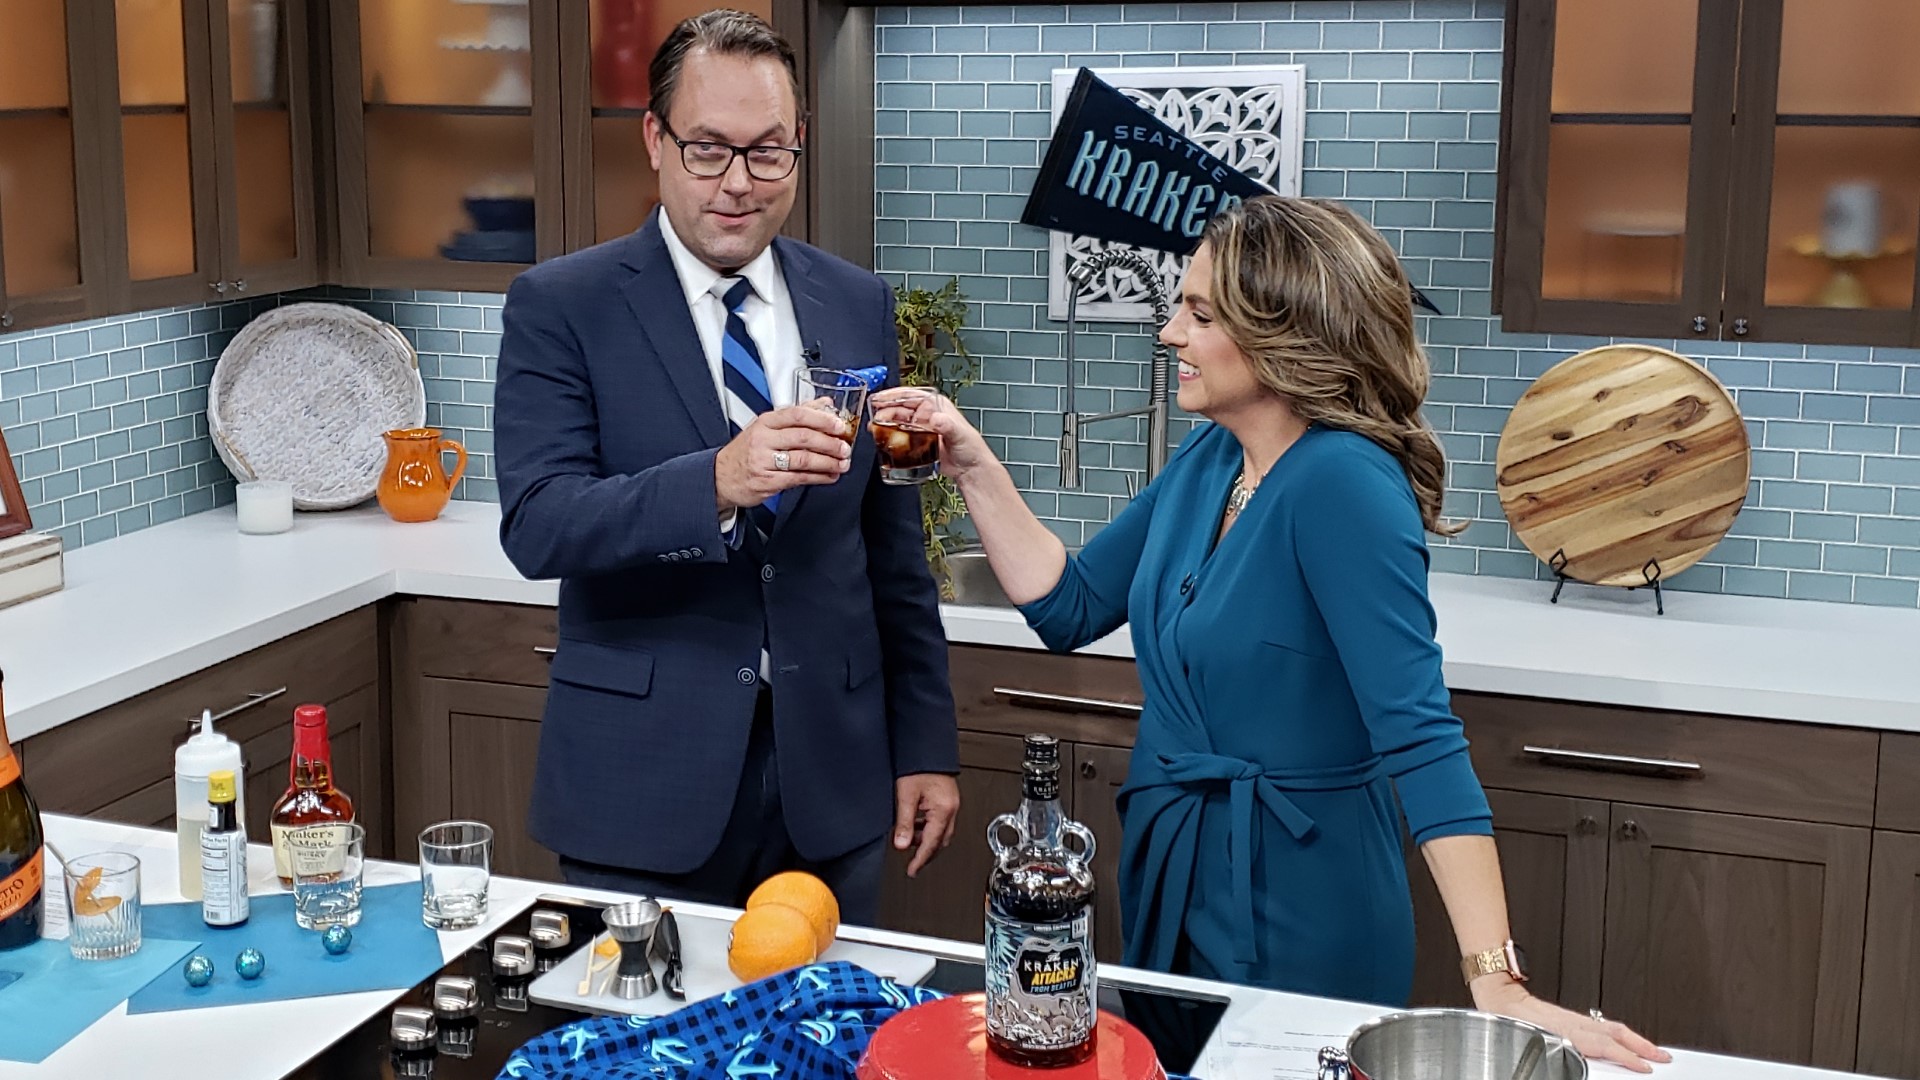 KING 5's Chris Daniels knows his way around a good cocktail. He joined Amity to show us a couple of drinks and talk hockey! #newday